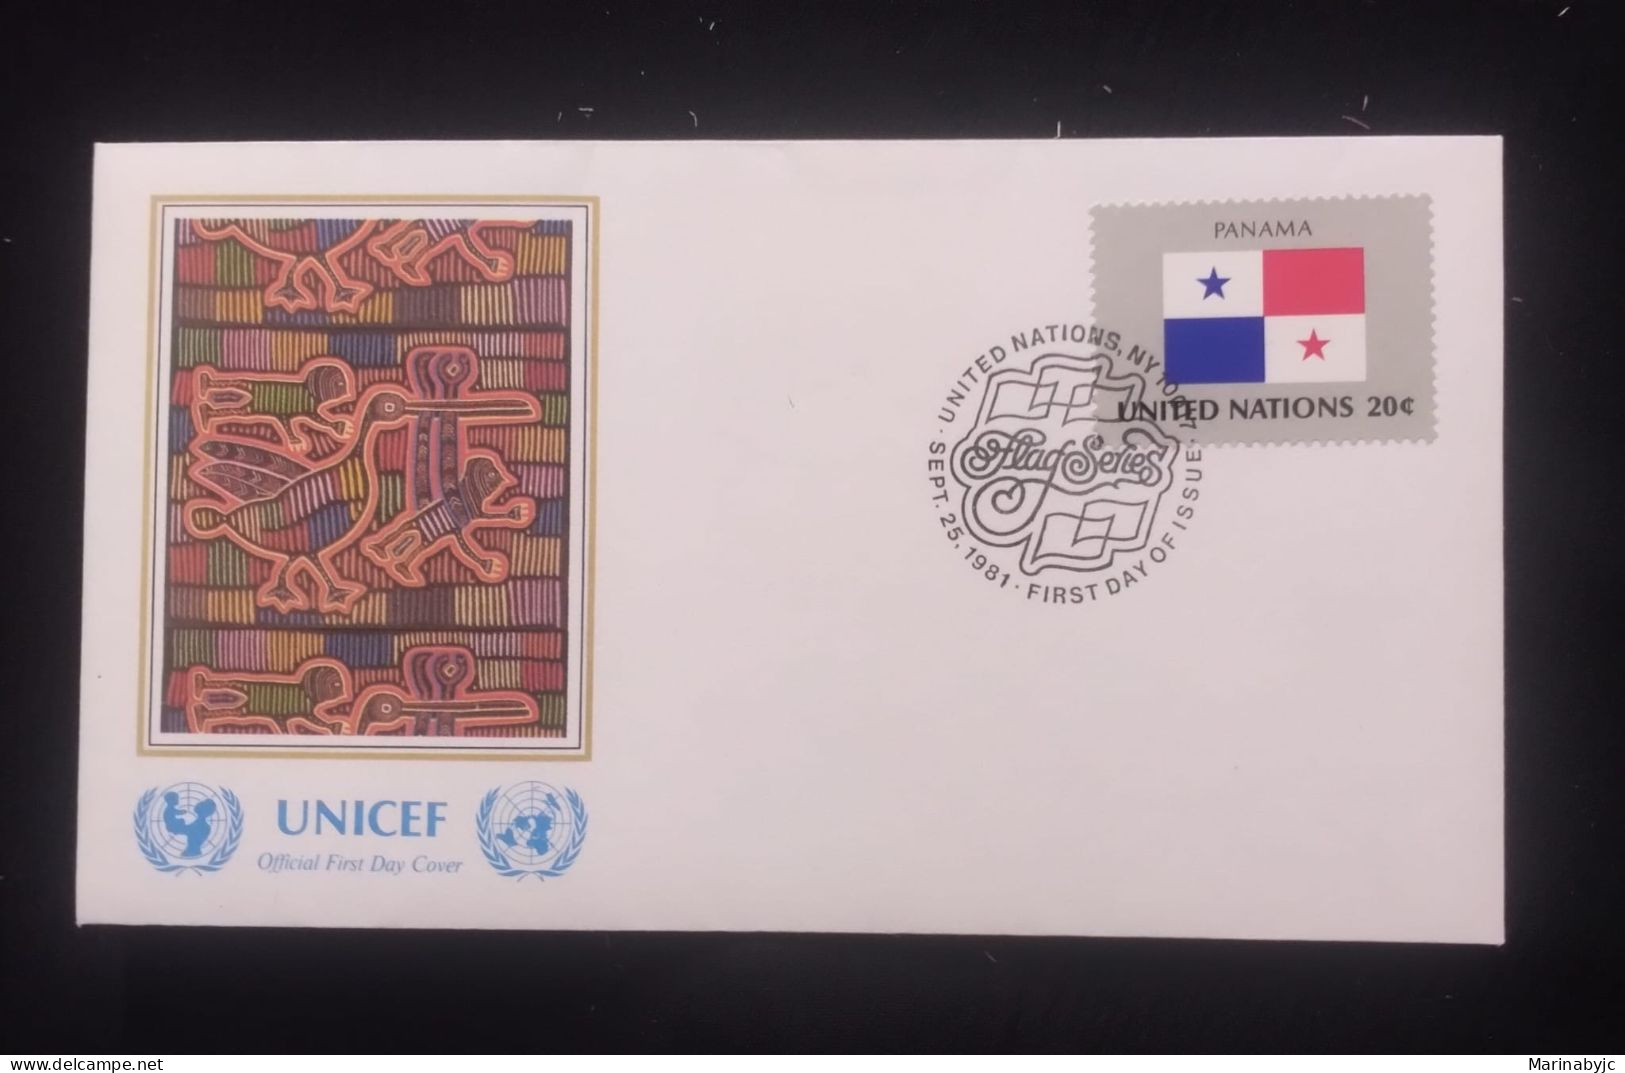 EL)1980 UNITED NATIONS, NATIONAL FLAG OF THE MEMBER COUNTRIES, PANAMA, ART - PAINTING, UNICEF, FDC - Neufs